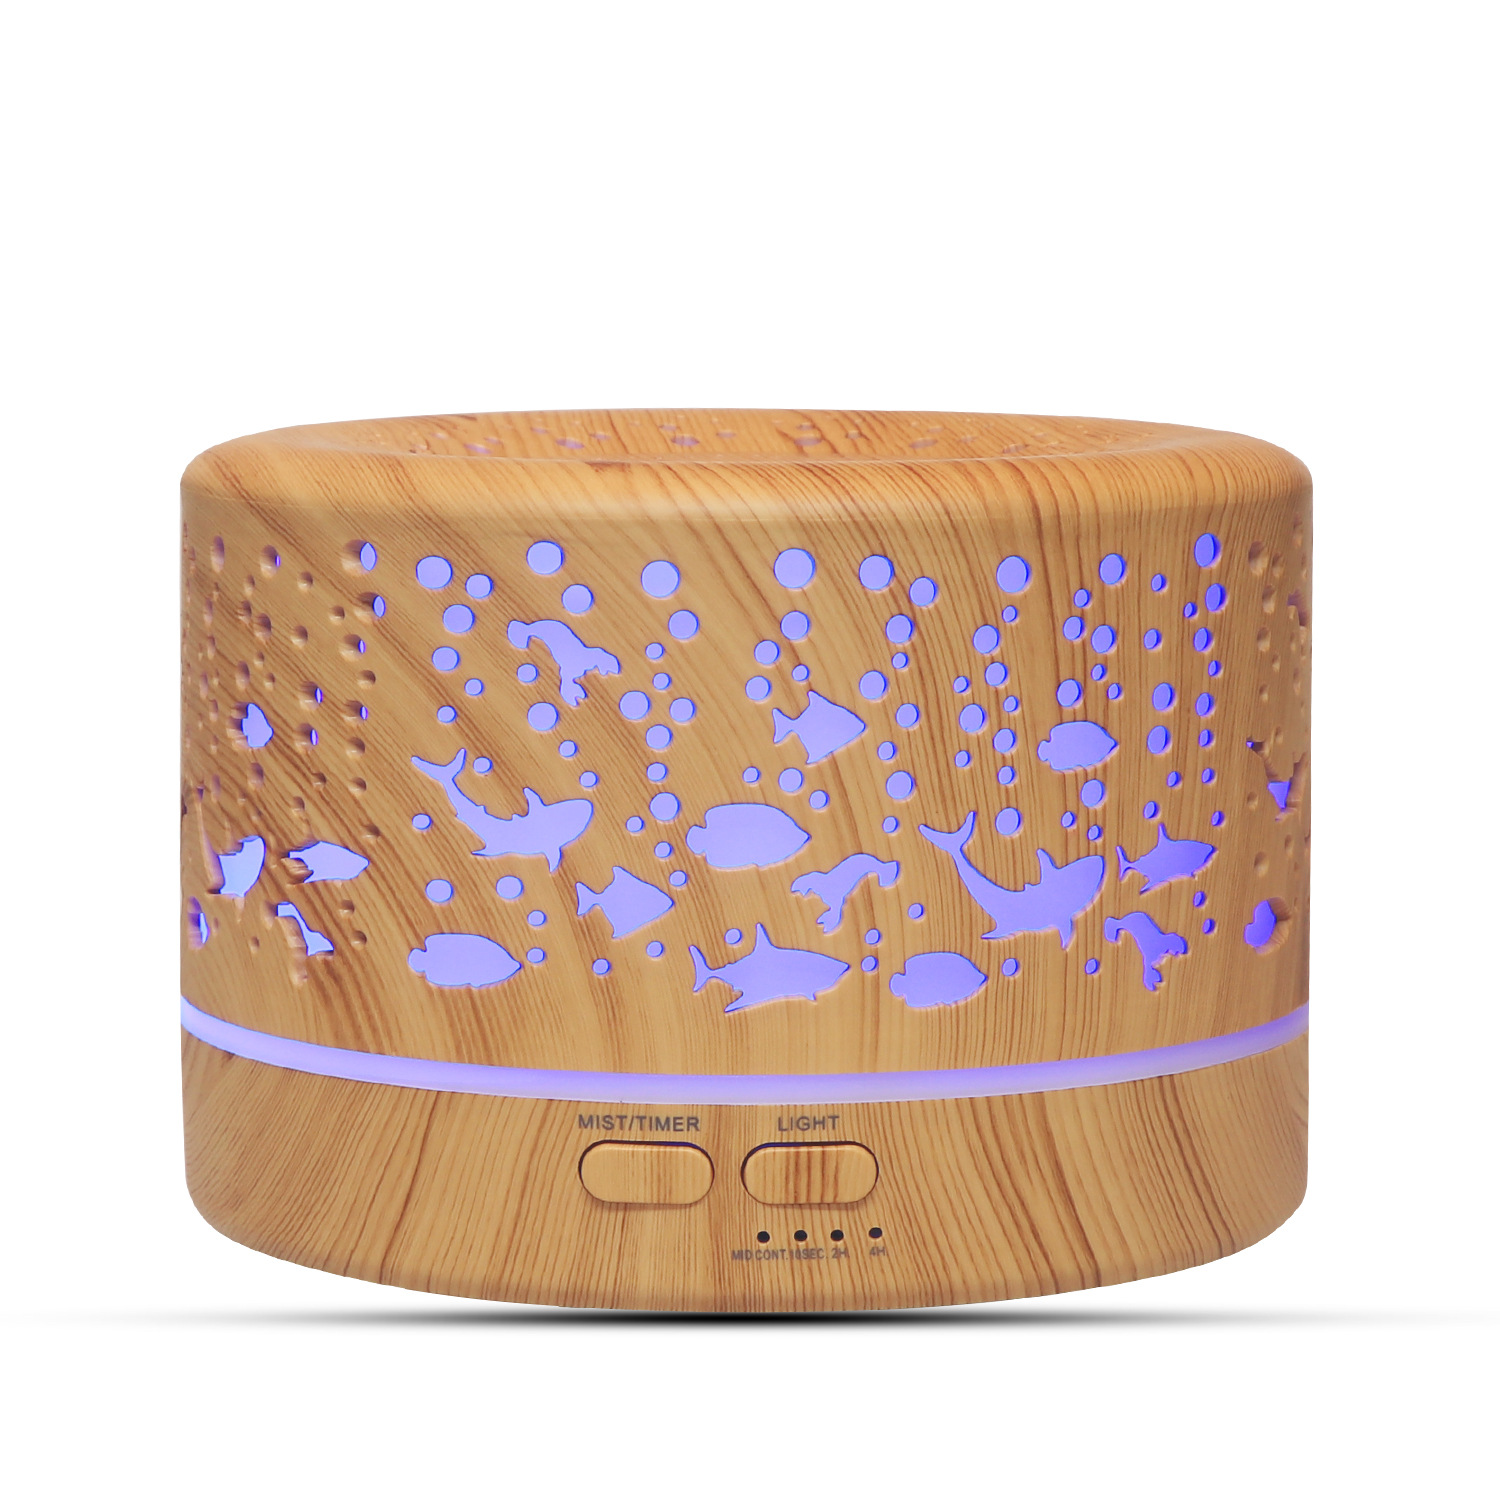 Factory Selling China 2021 Best 500ml Wood Grain Electric Aroma Diffuser Ultrasonic Humidifier Room Essential Oil Diffuser